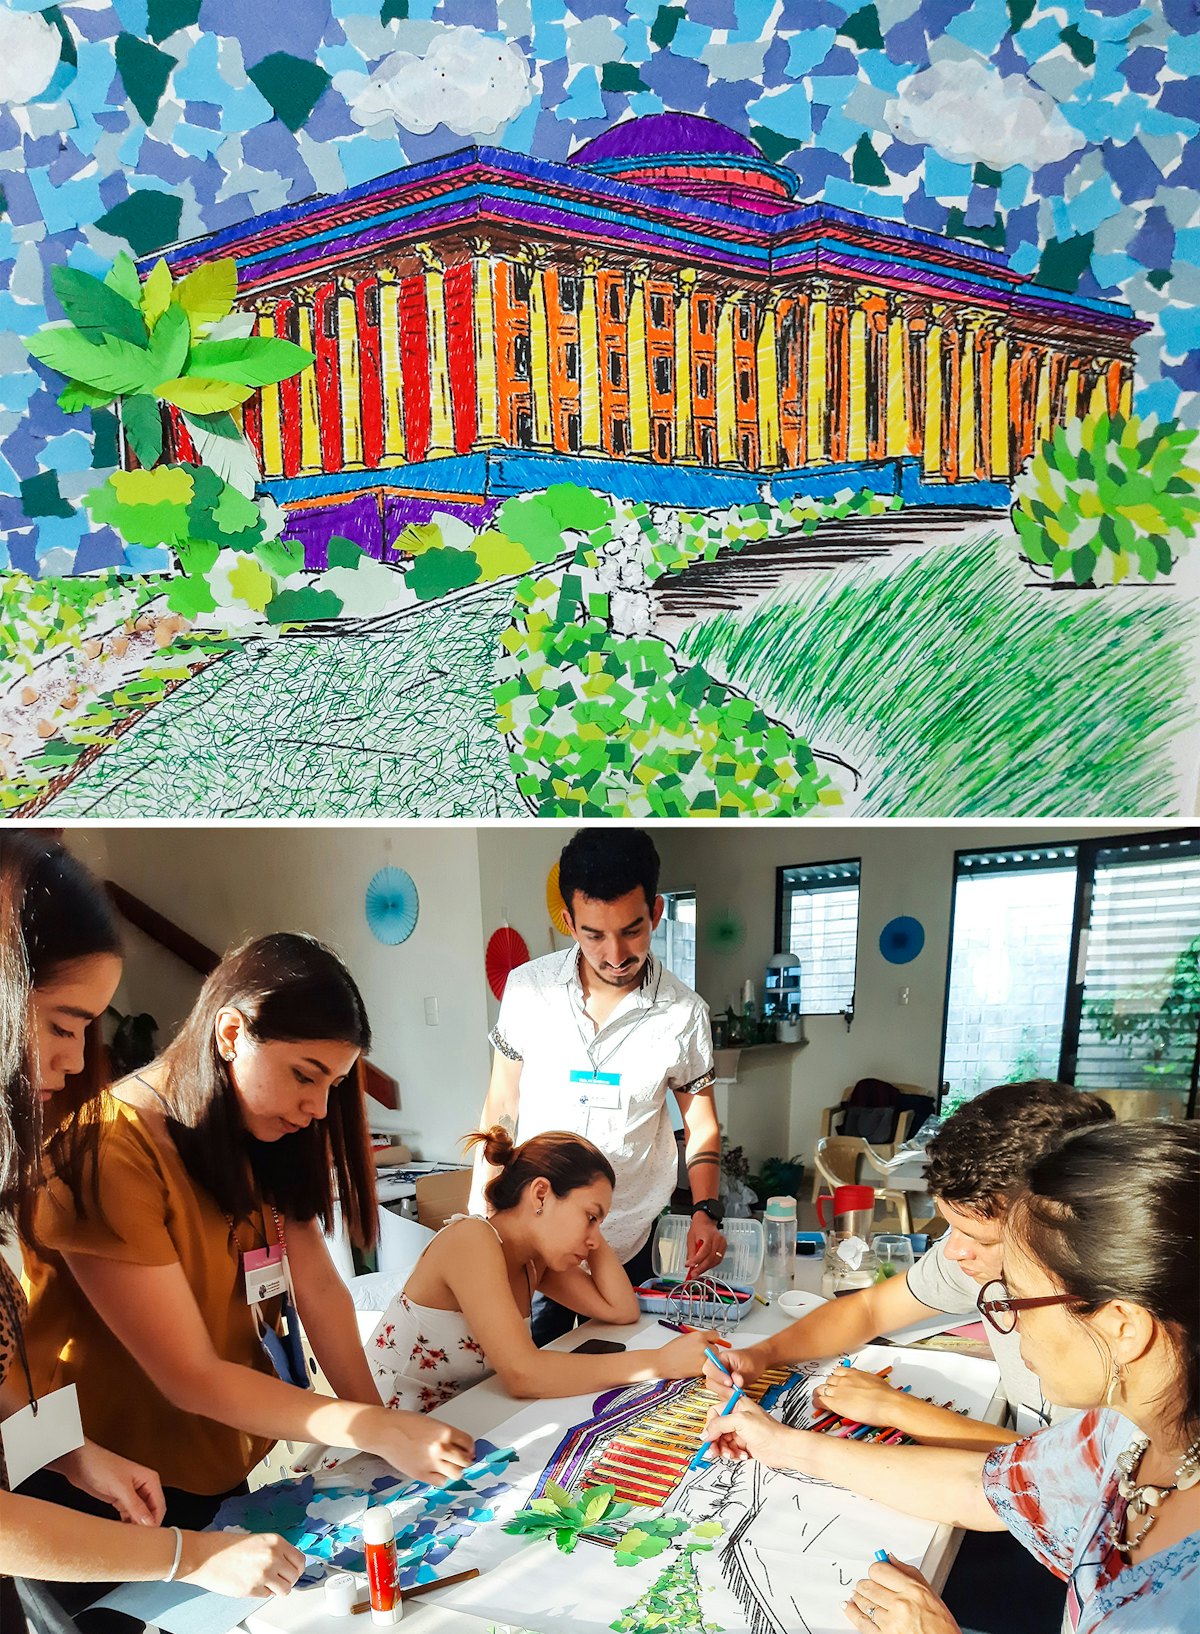 Participants at a gathering in Colon, El Salvador, created a collaborative paper mosaic artwork featuring the Seat of the Universal House of Justice at the Baháʼí World Centre.